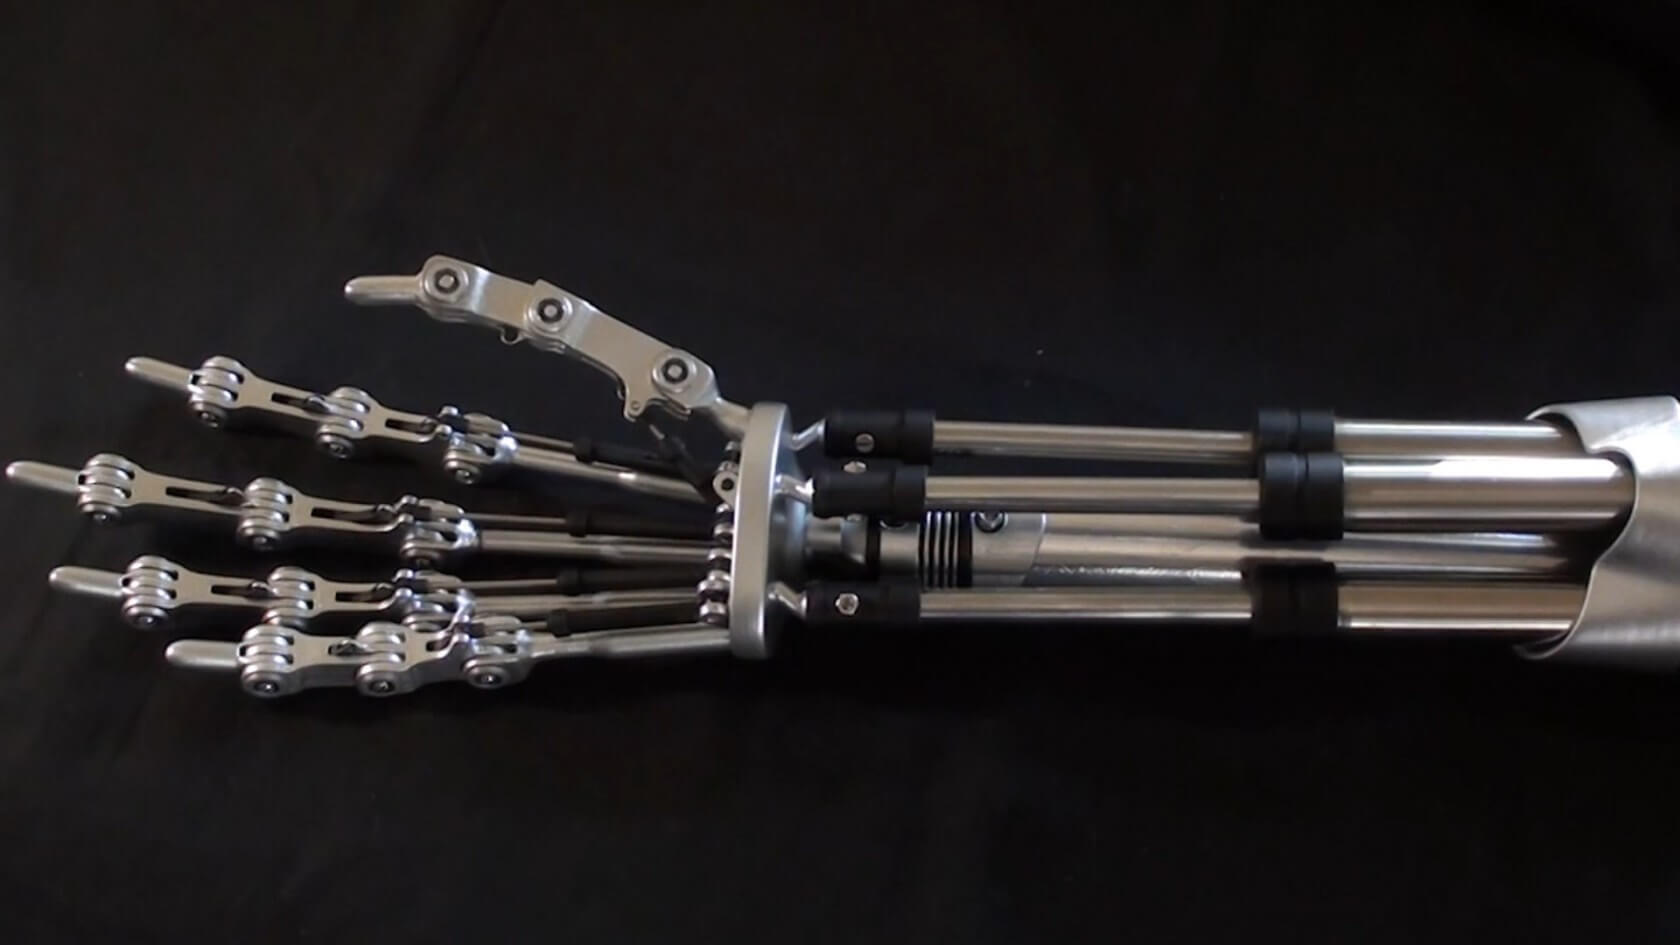 You can own a Terminator 2 replica 'EndoArm' for just $175